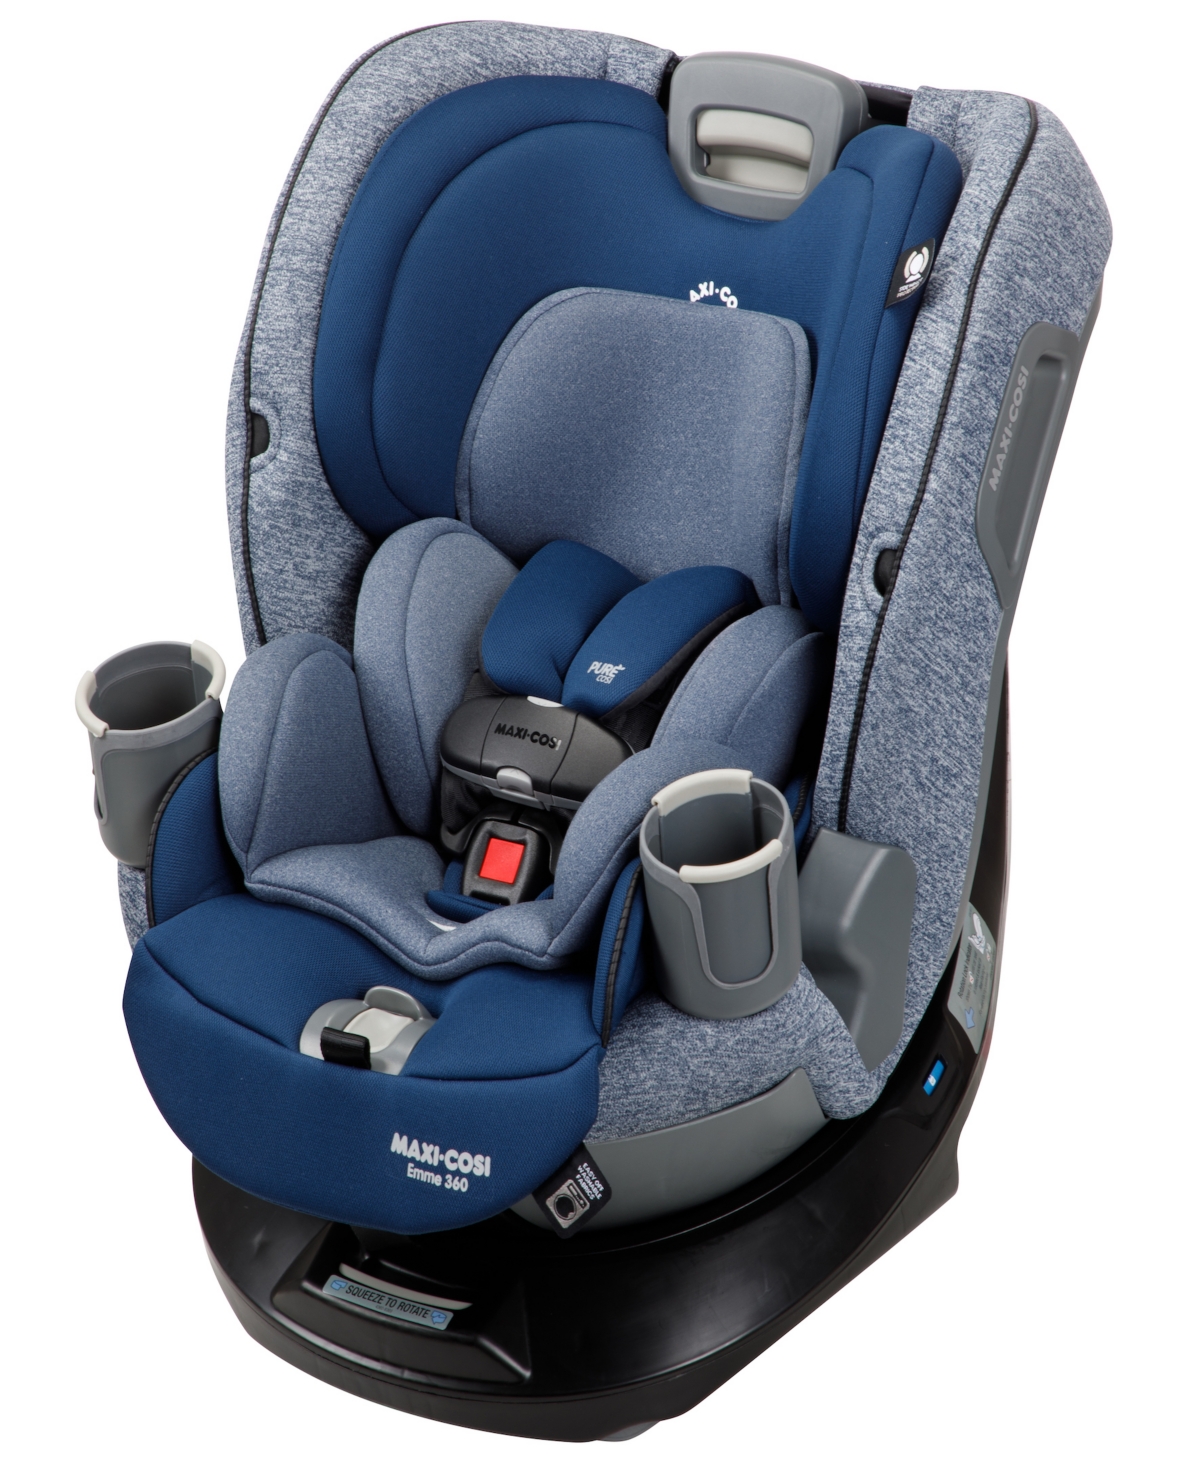 Maxi-cosi Baby Girls And Boys Emme Convertible Car Seat In Navy Wonder